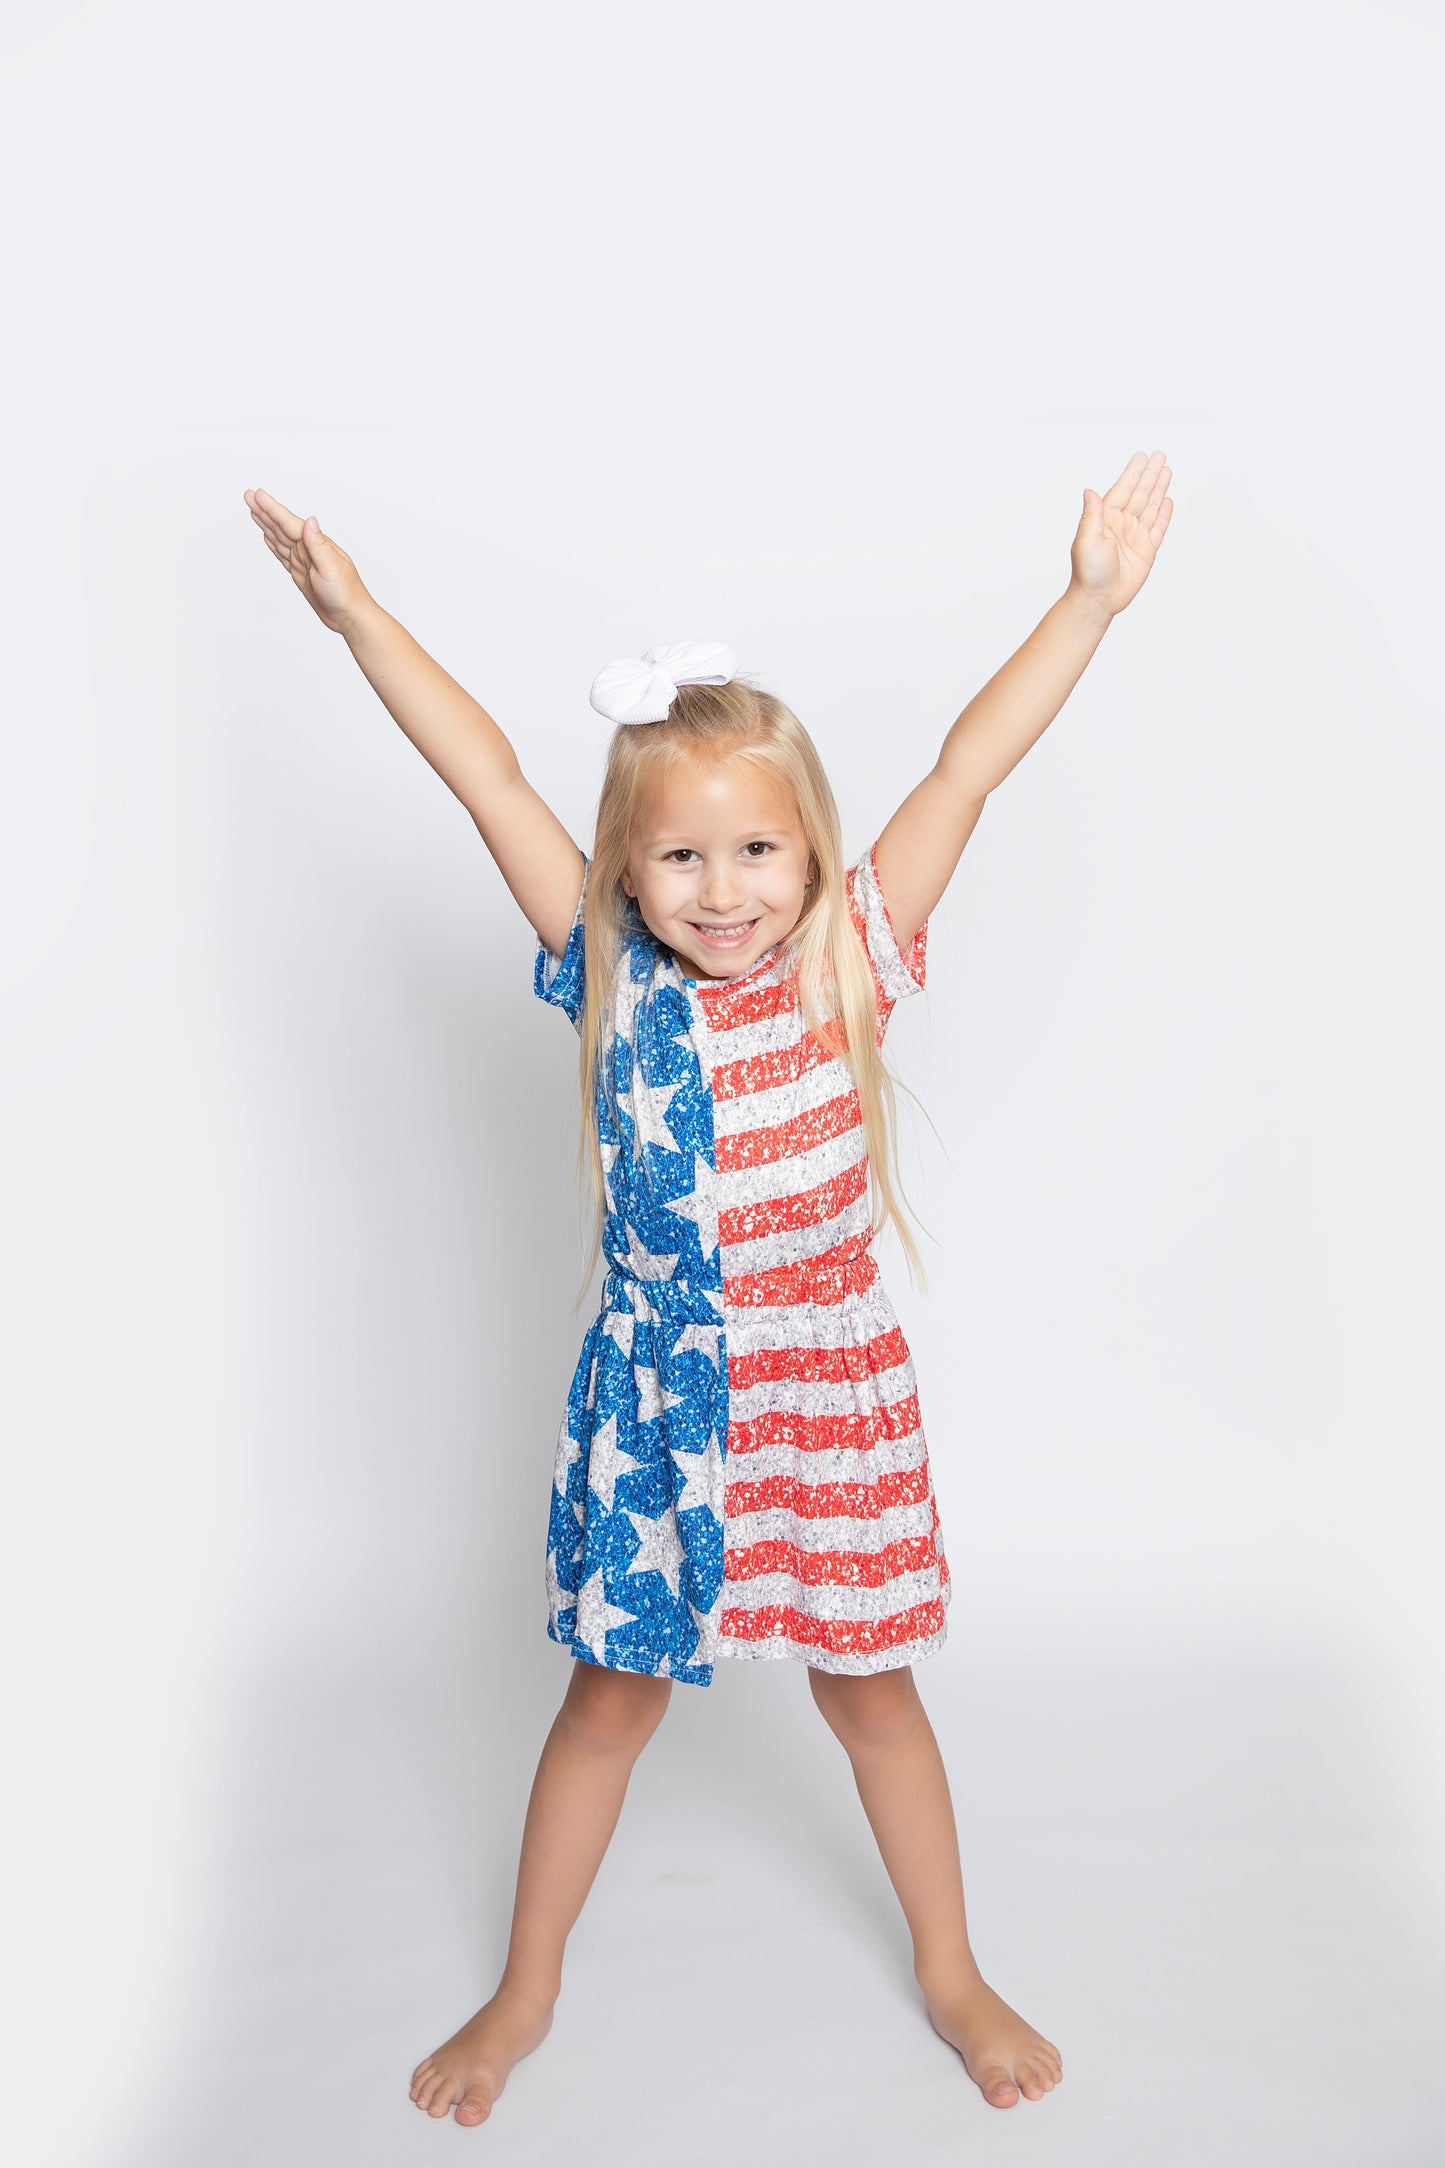 GSD1263 Stars Red Stripes Print Girls 4th of July Clothes Set